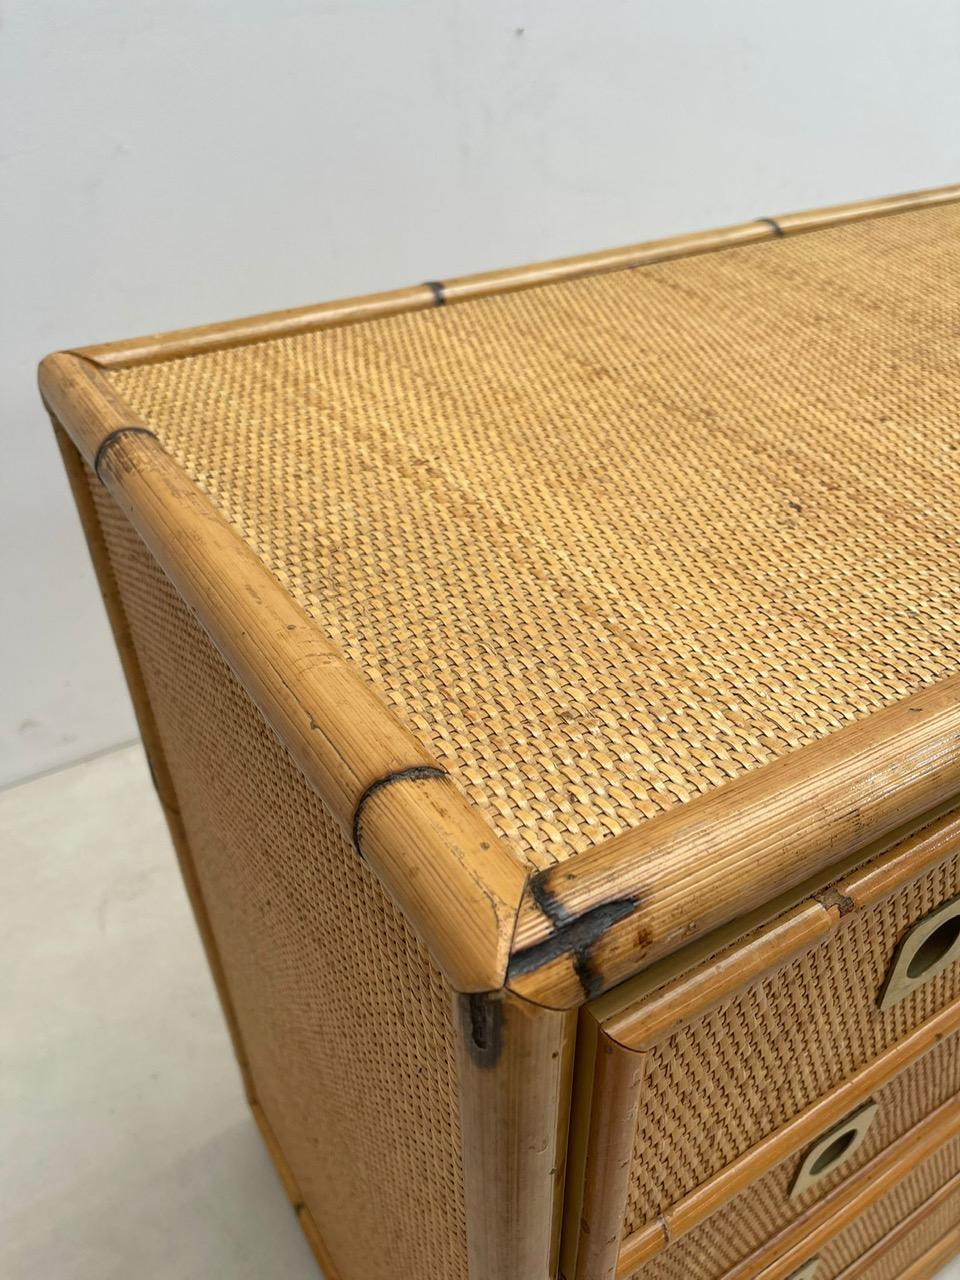 Dal Vera Bamboo and Wicker/Rattan Chest of Drawers, Italy 1960s For Sale 1